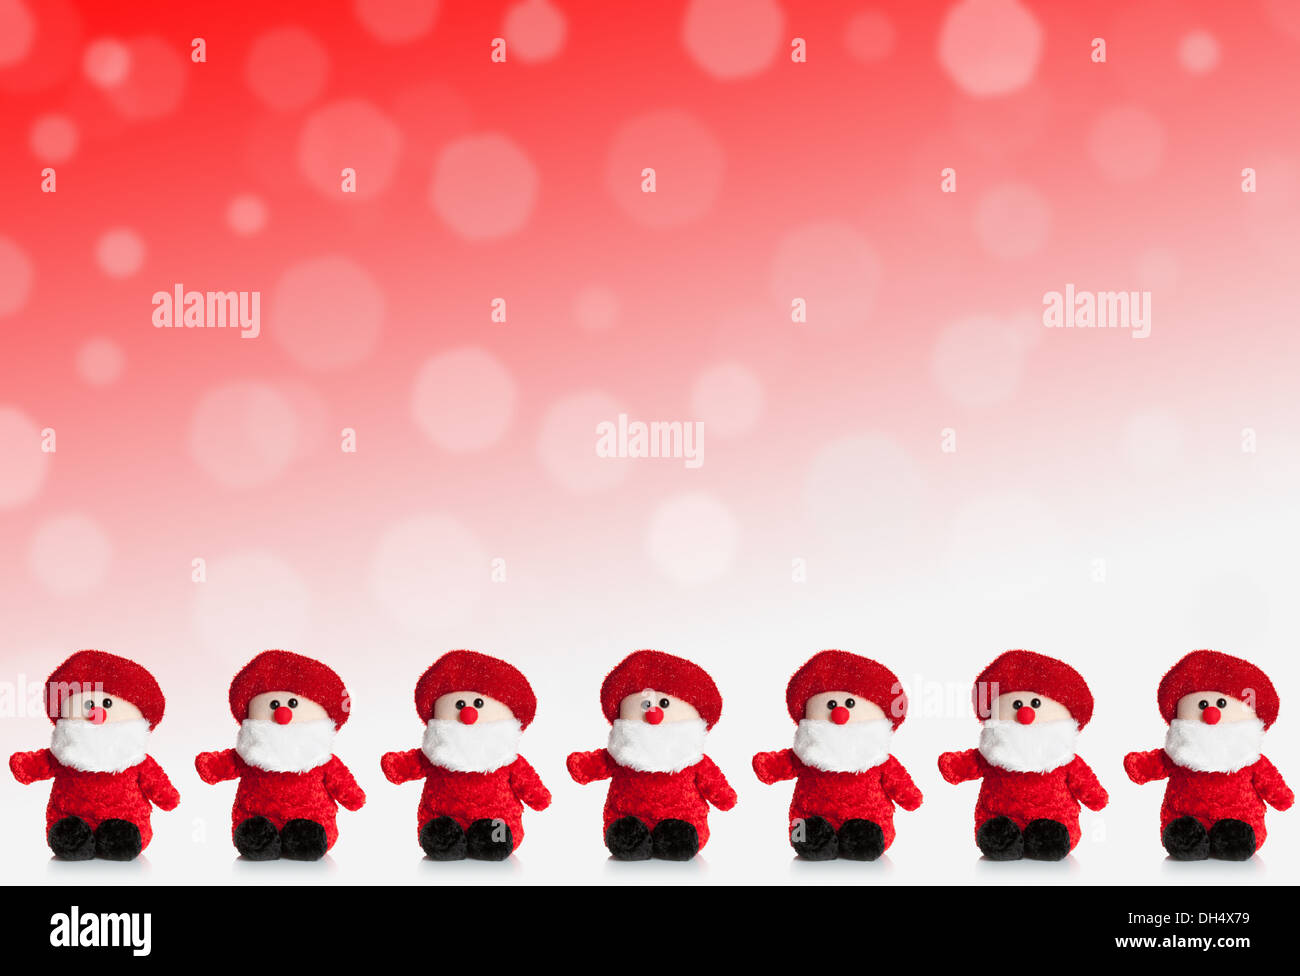 Row of puppets of Santa Claus on a red background with snow. Stock Photo